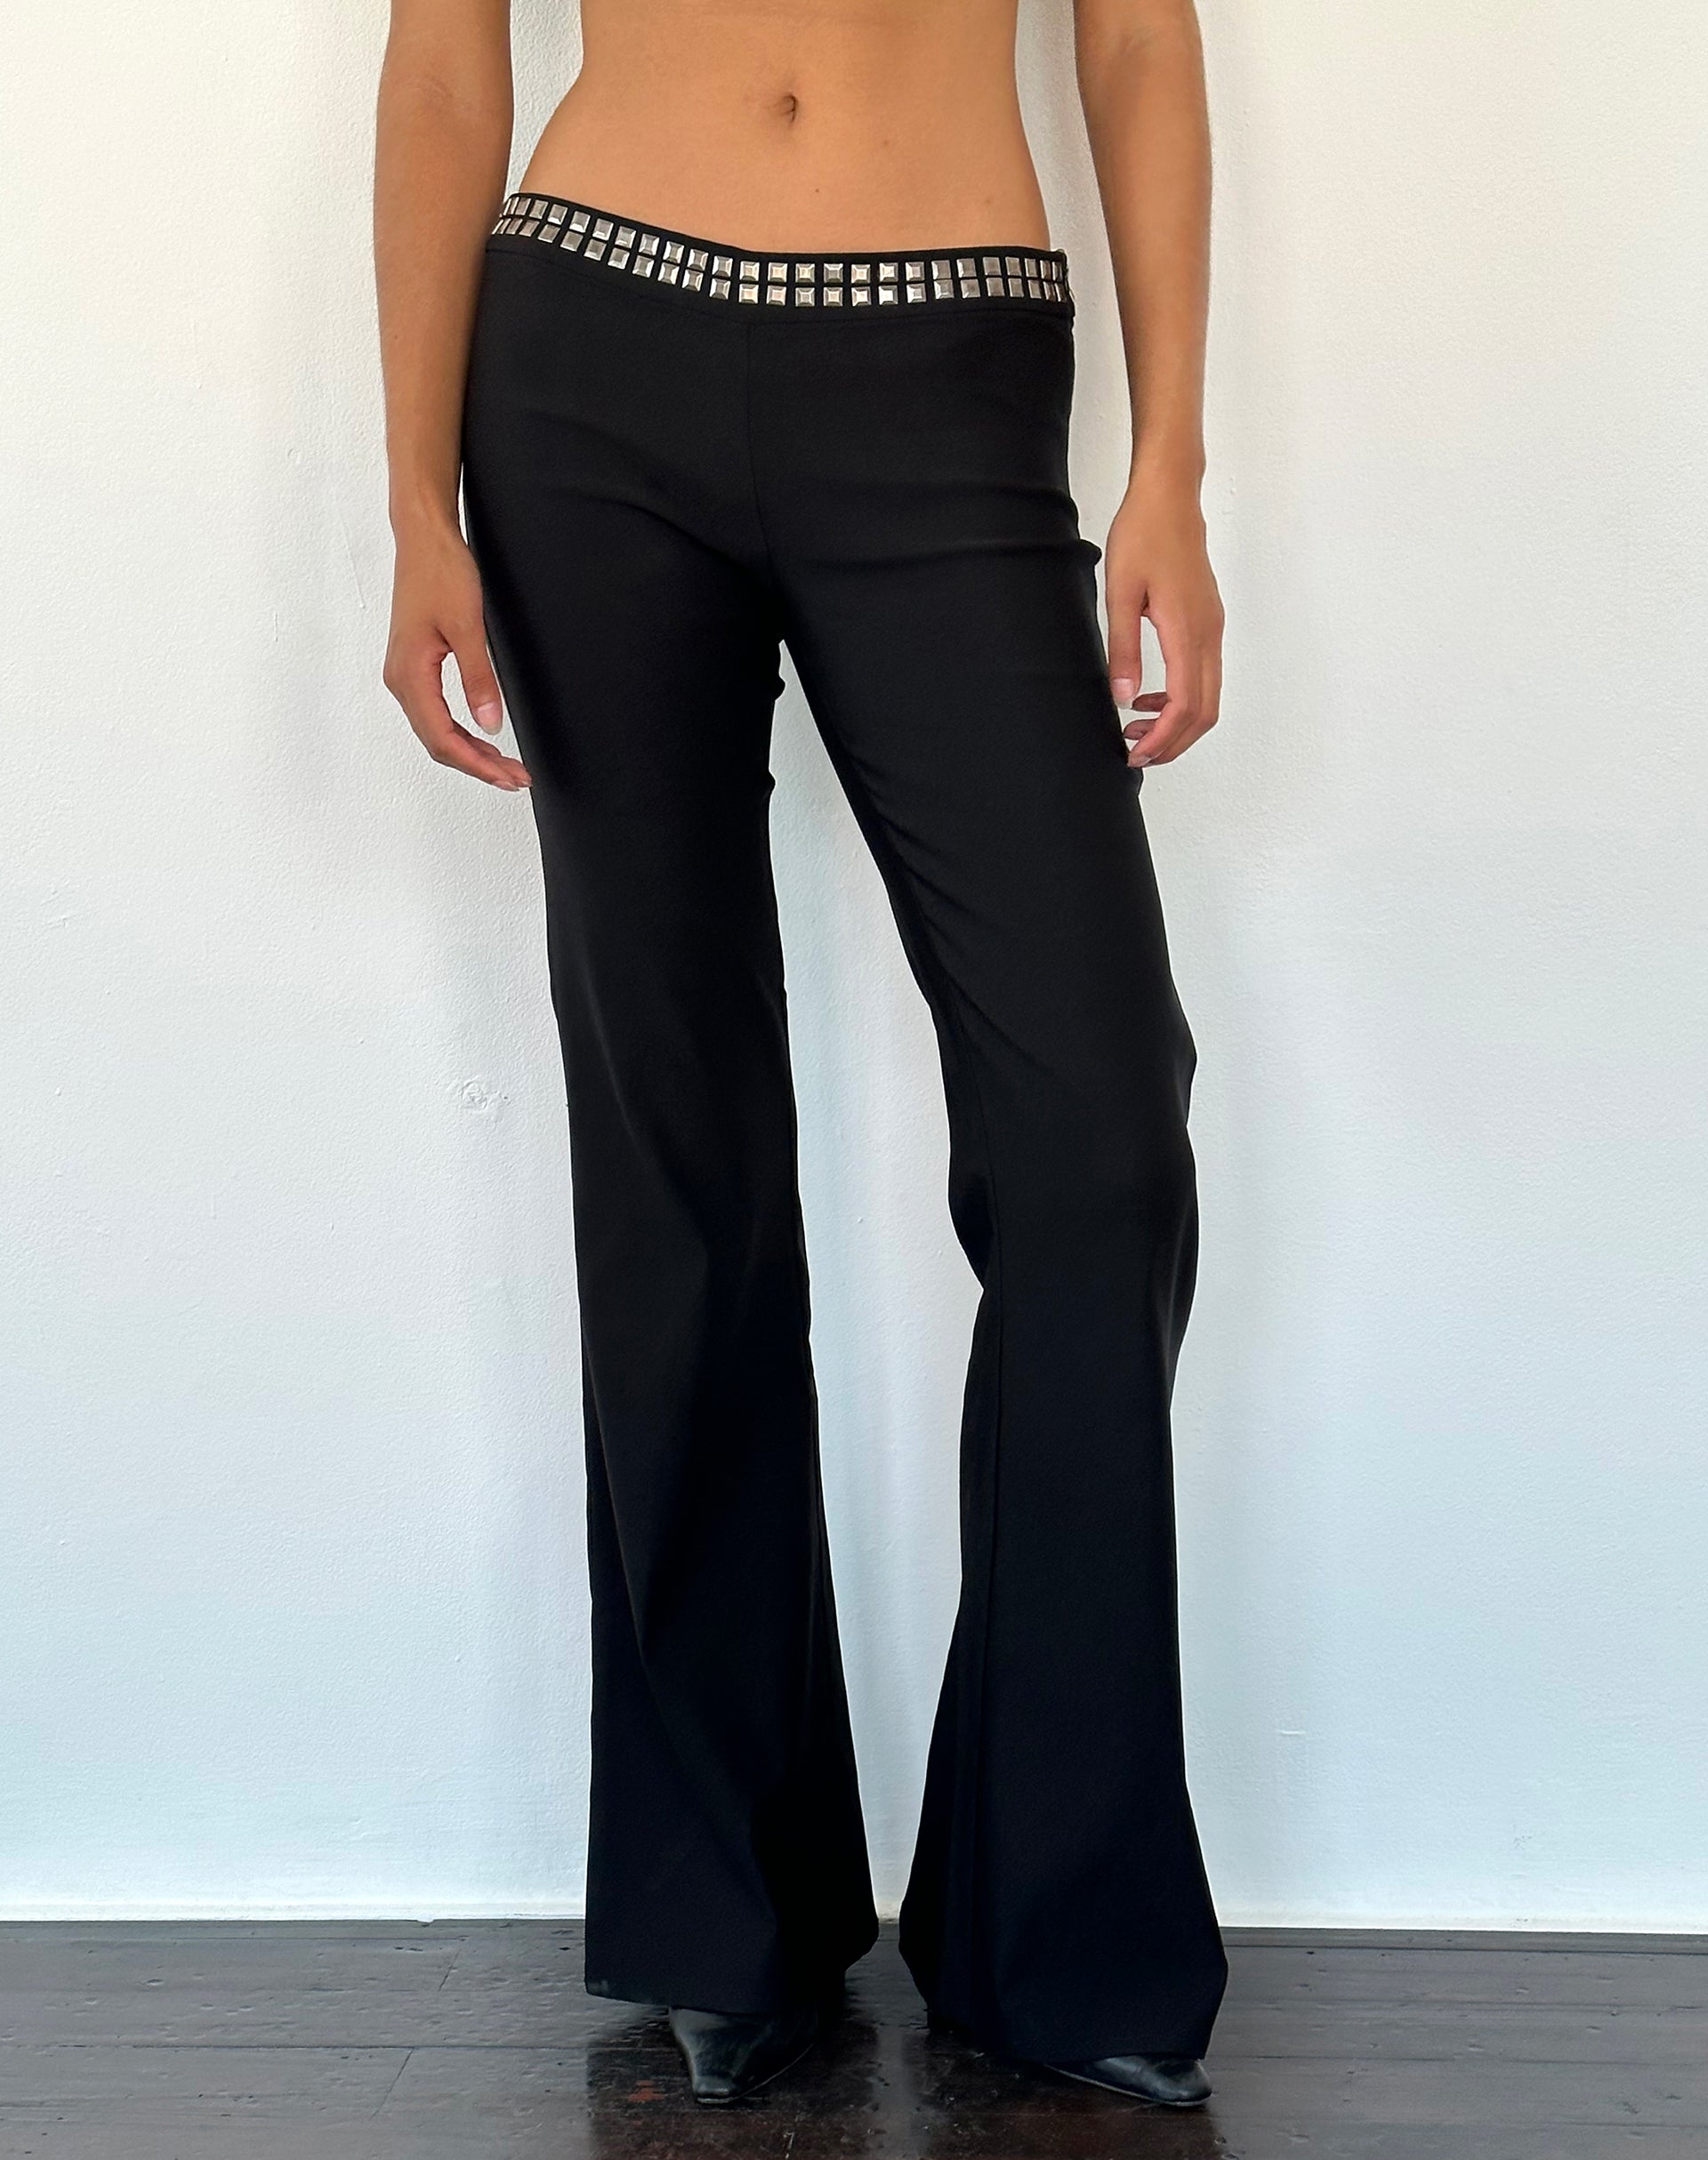 Elio Flared Trouser in Black Lace